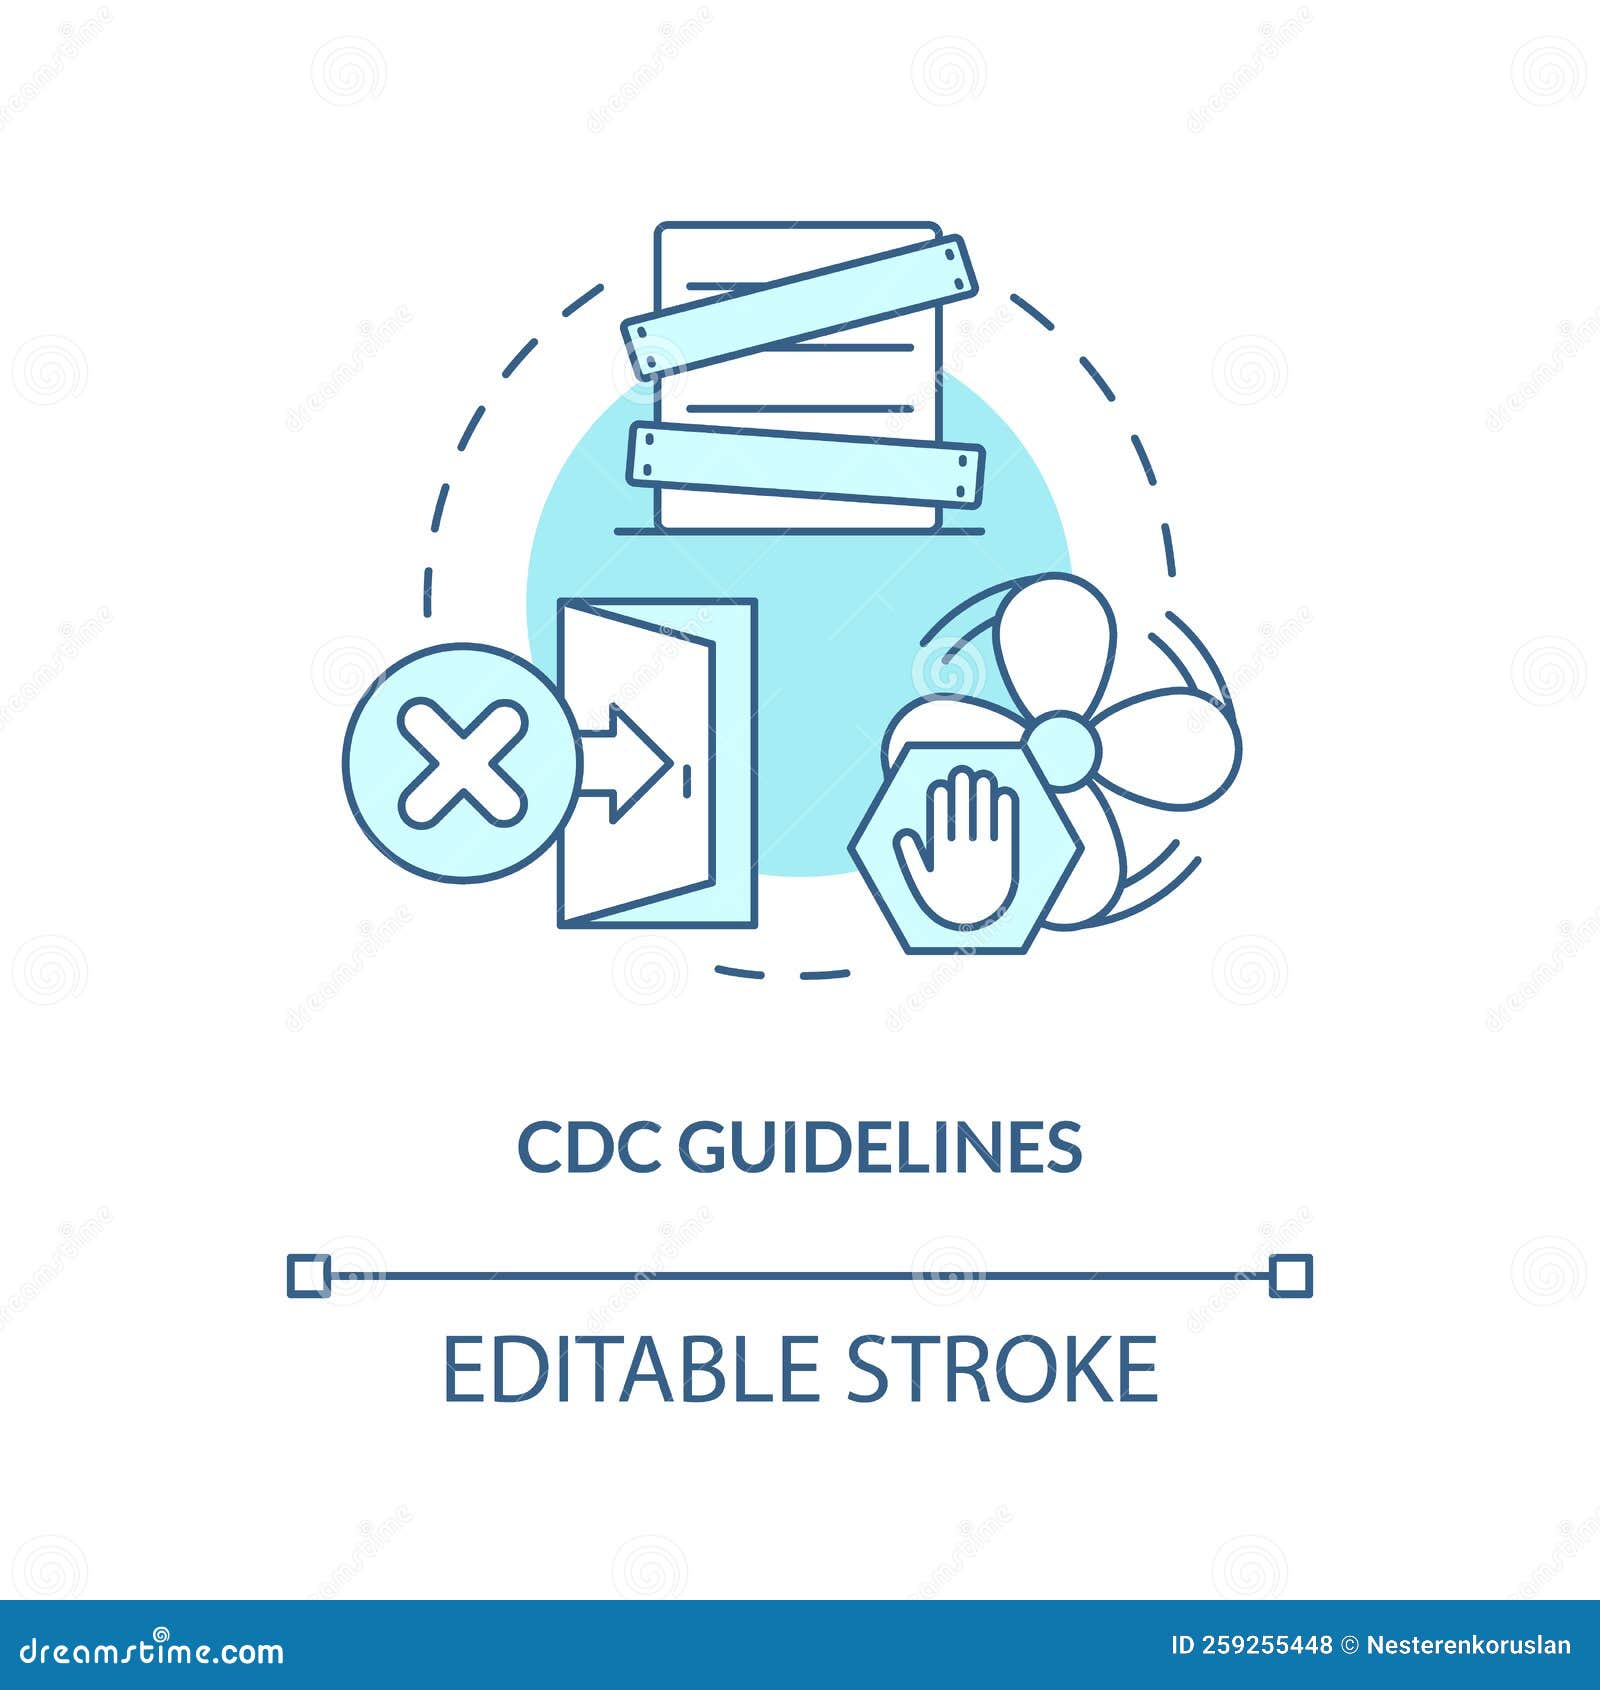 cdc guidelines turquoise concept icon